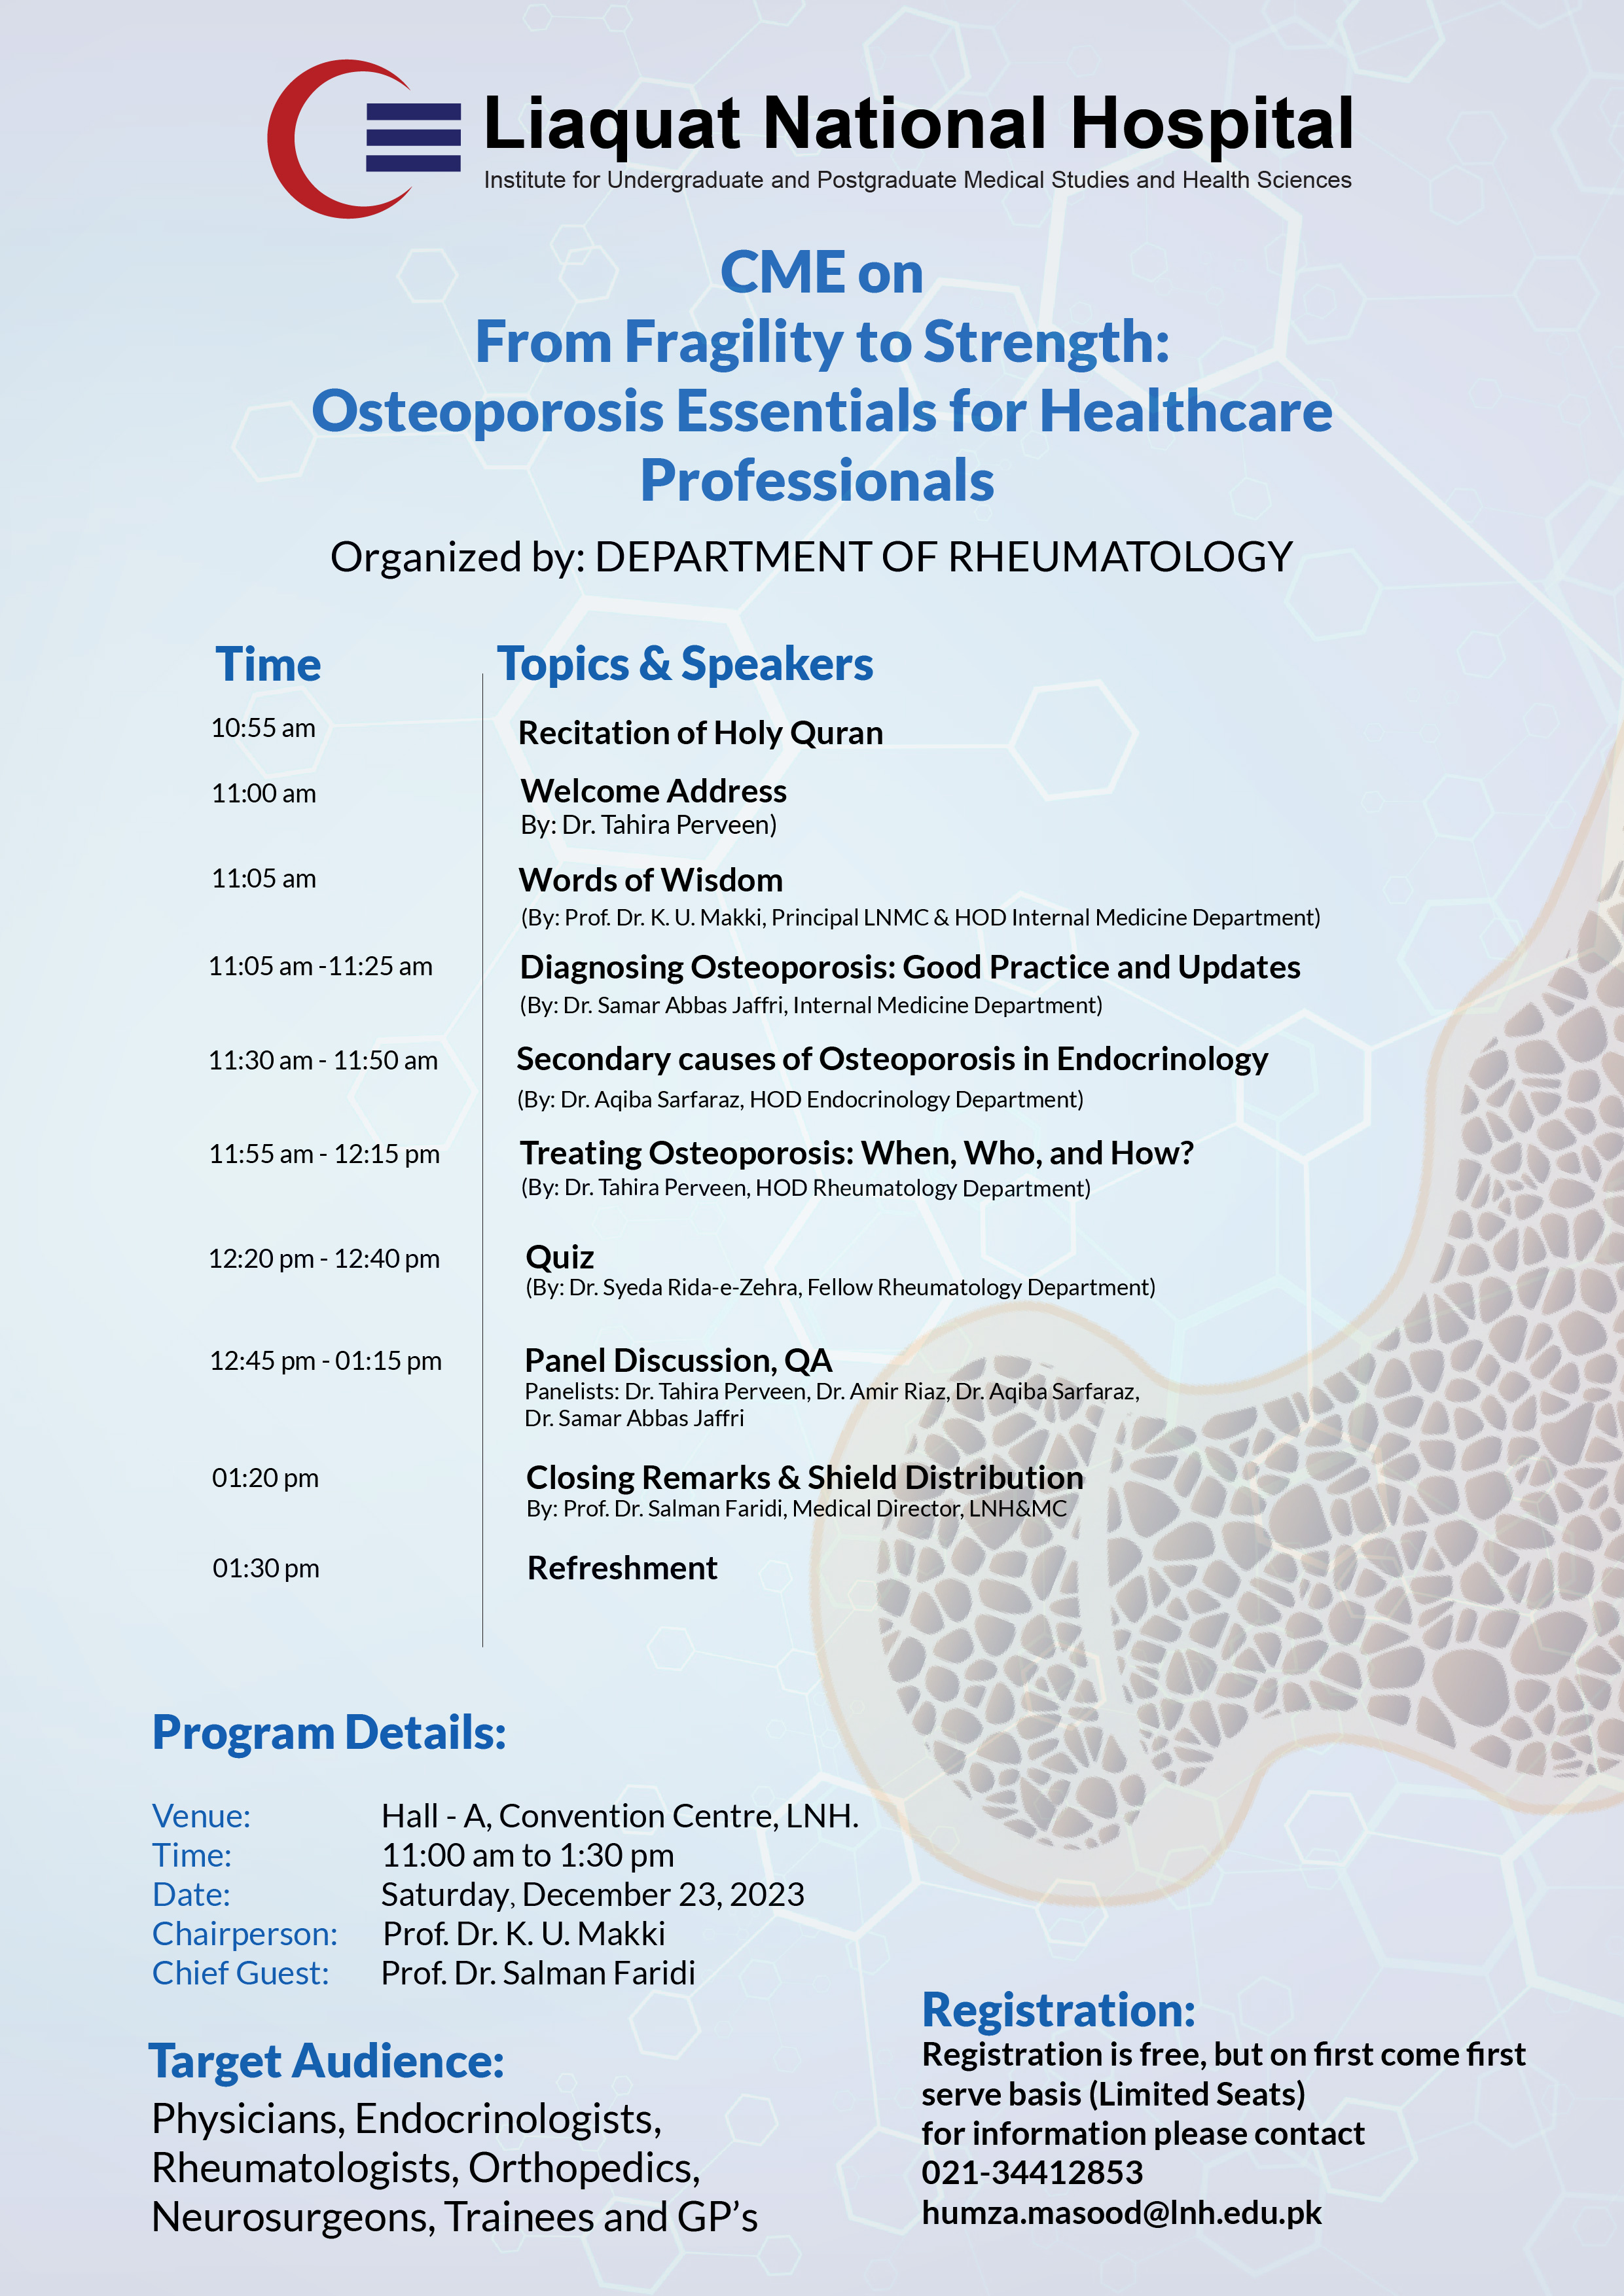 CME on From Fragility to Strength: Osteoporosis Essentials for Healthcare Professionals